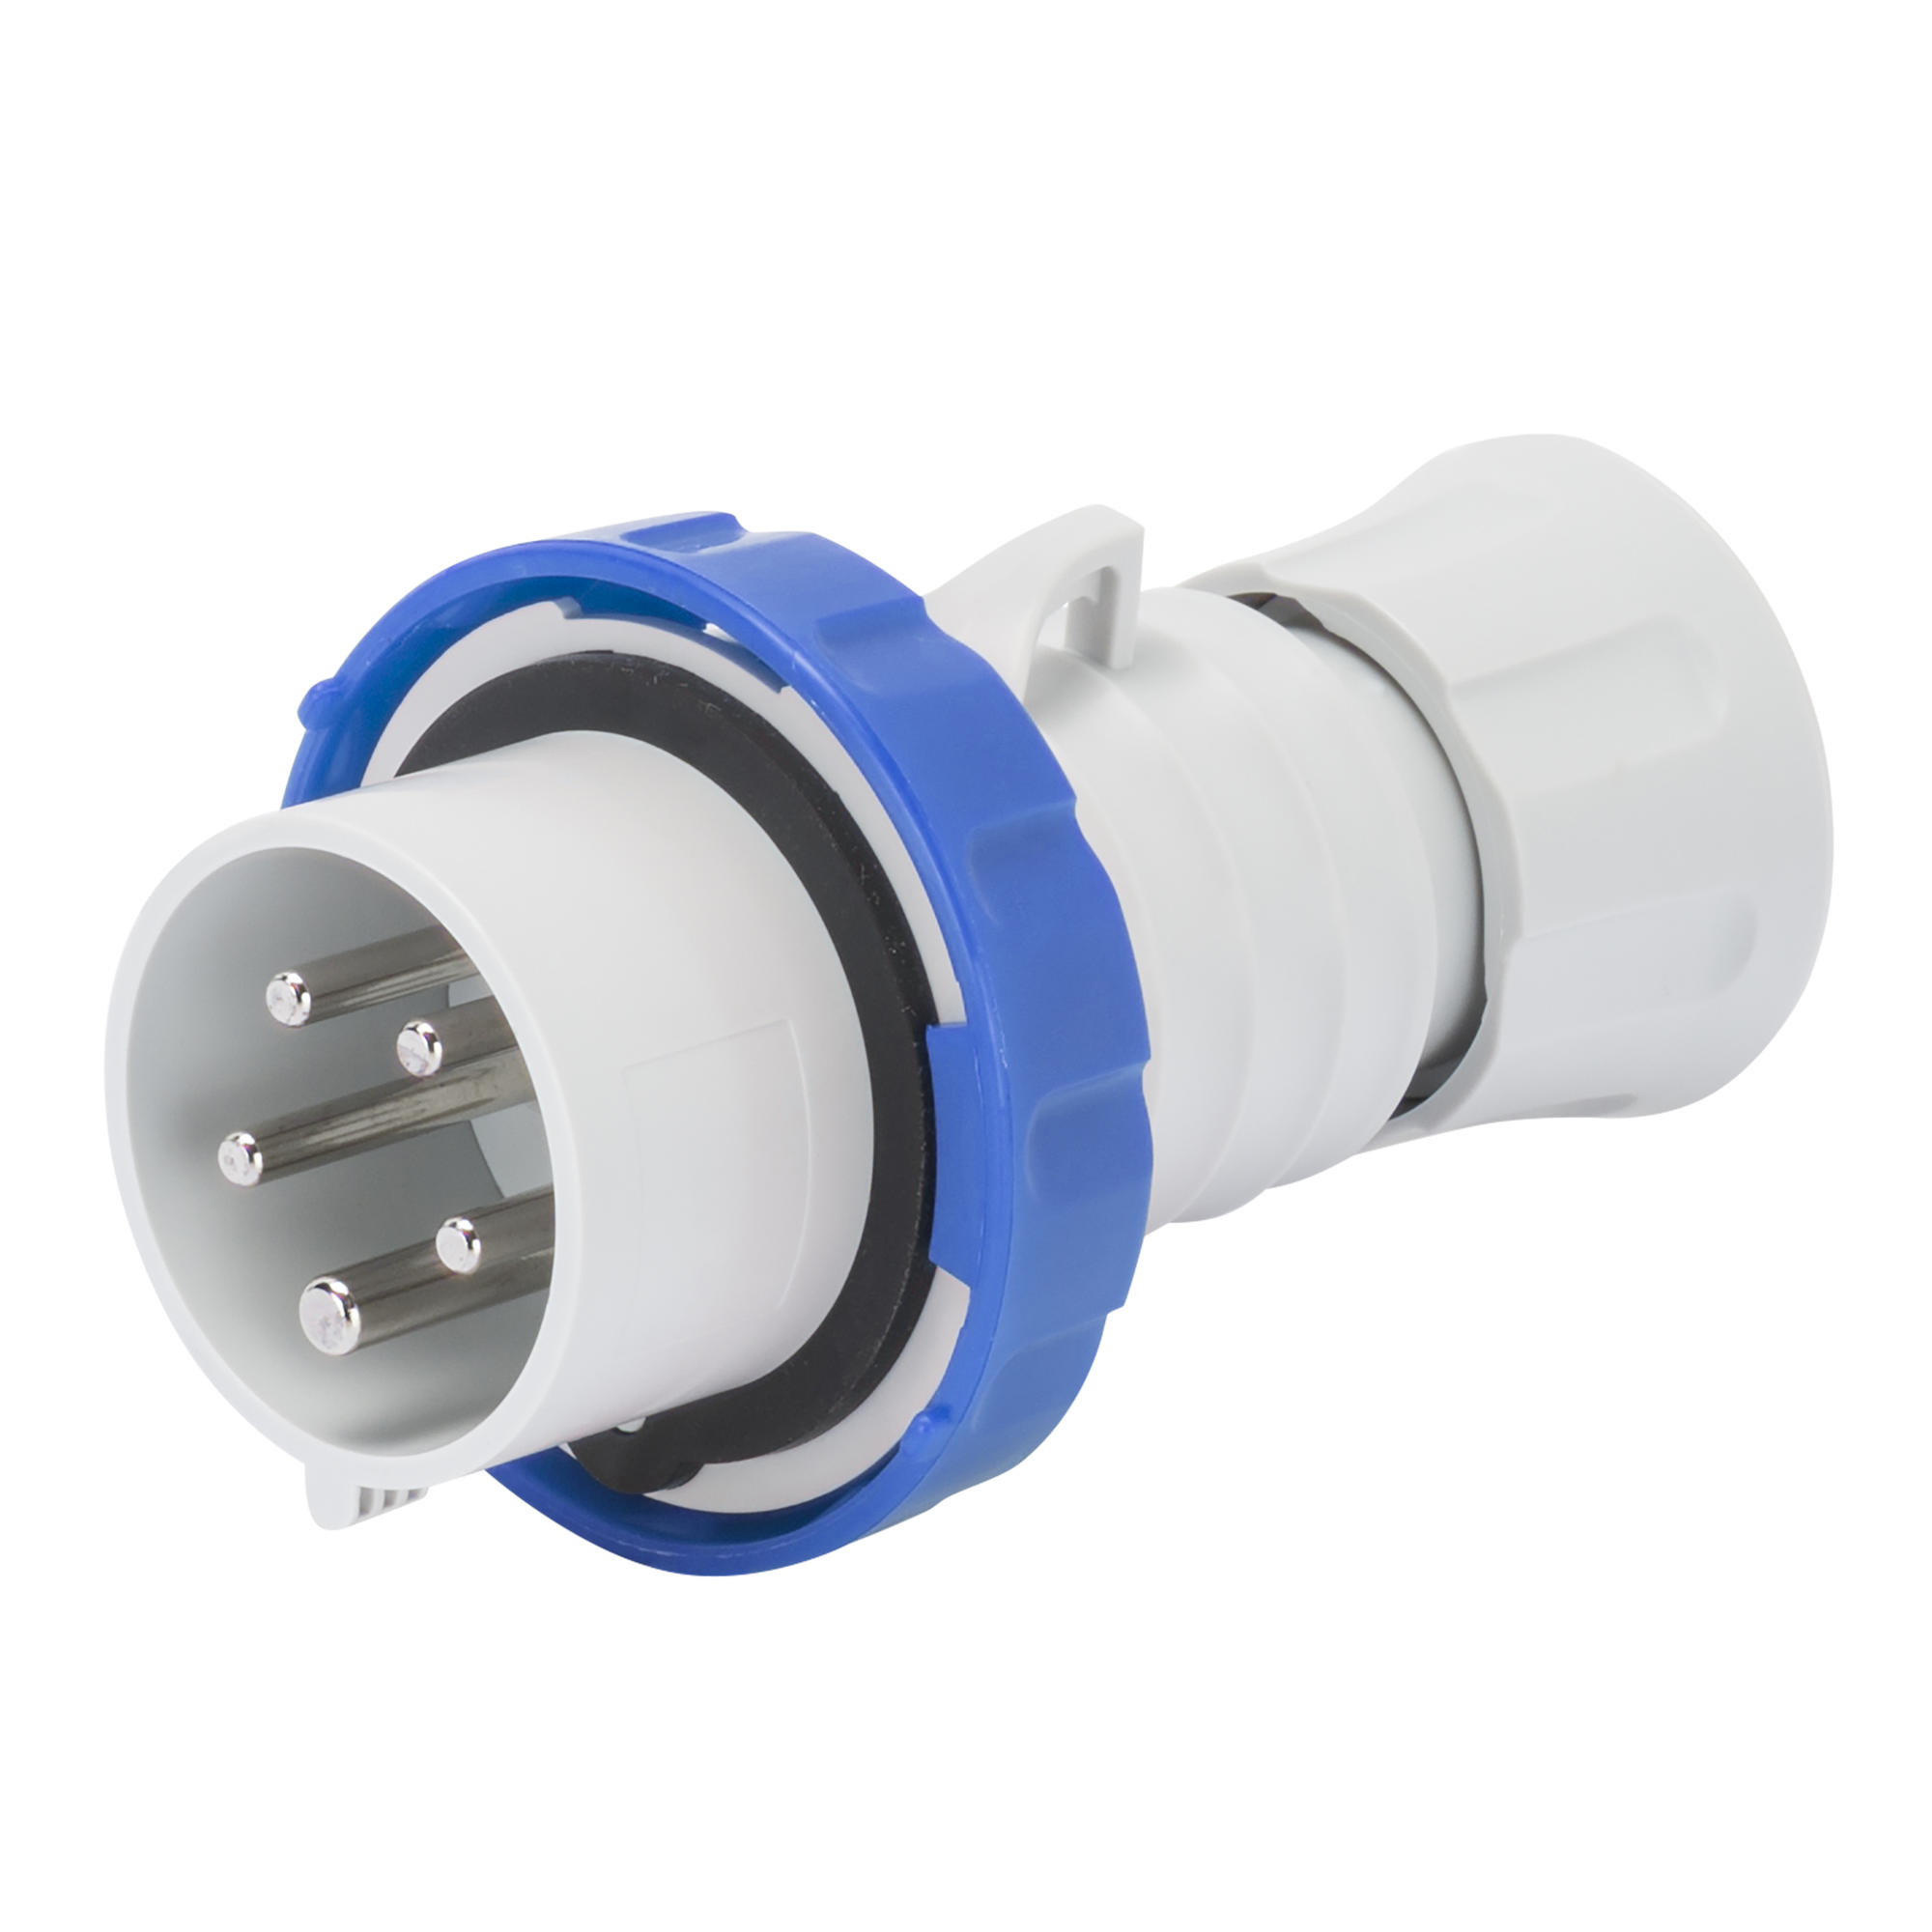 STRAIGHT PLUG HP - WITH FASE INVERTER - IP66/IP67/IP68/IP69 - 3P+E 16A 200-250V - BLUE - 9H - SCREW WIRING